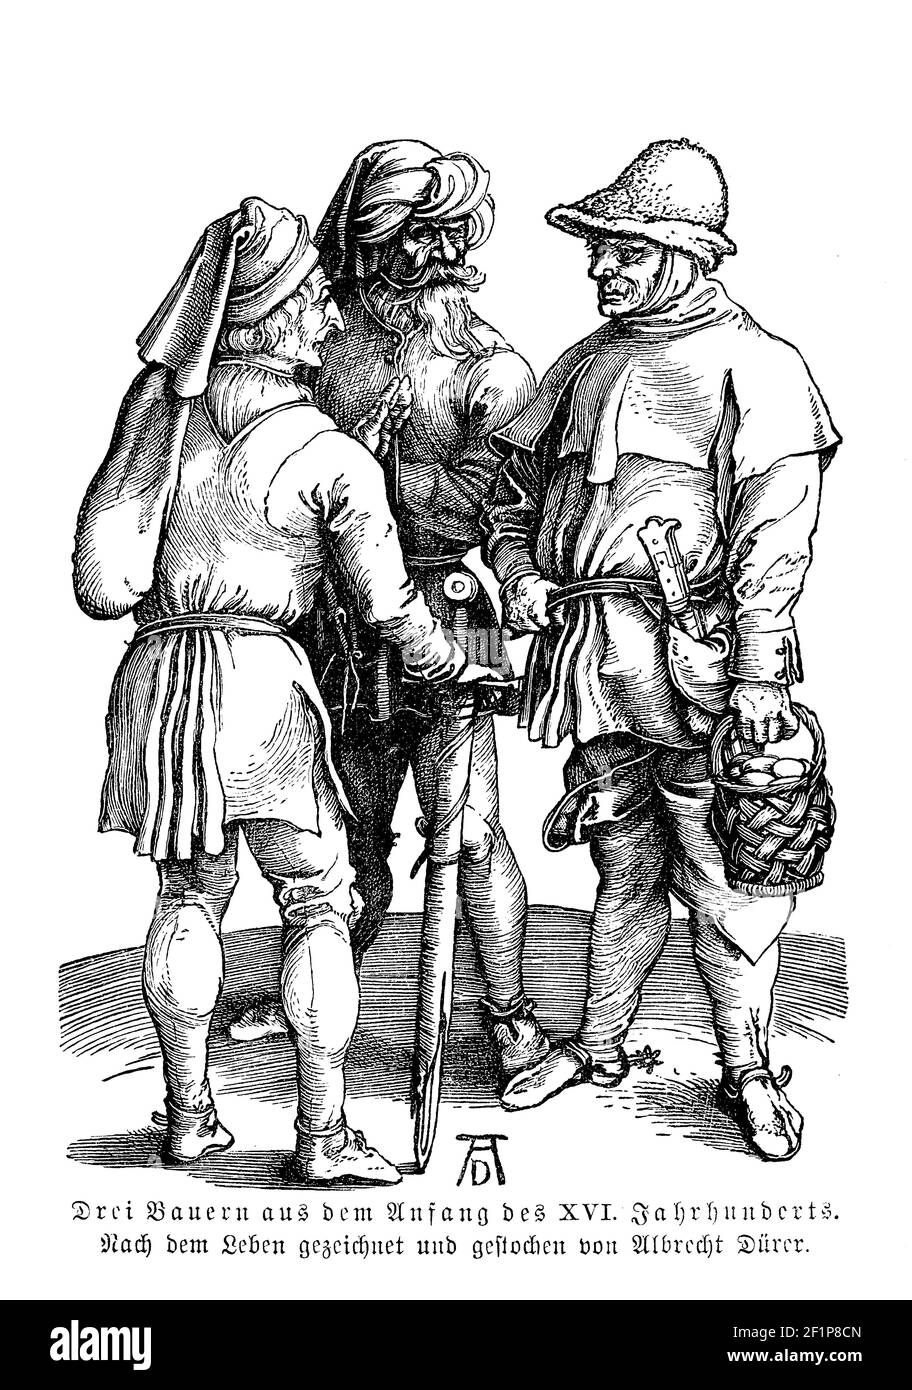 Three Peasants in Conversation, Renaissance times, engraving by Albrecht Duerer 1497 Stock Photo